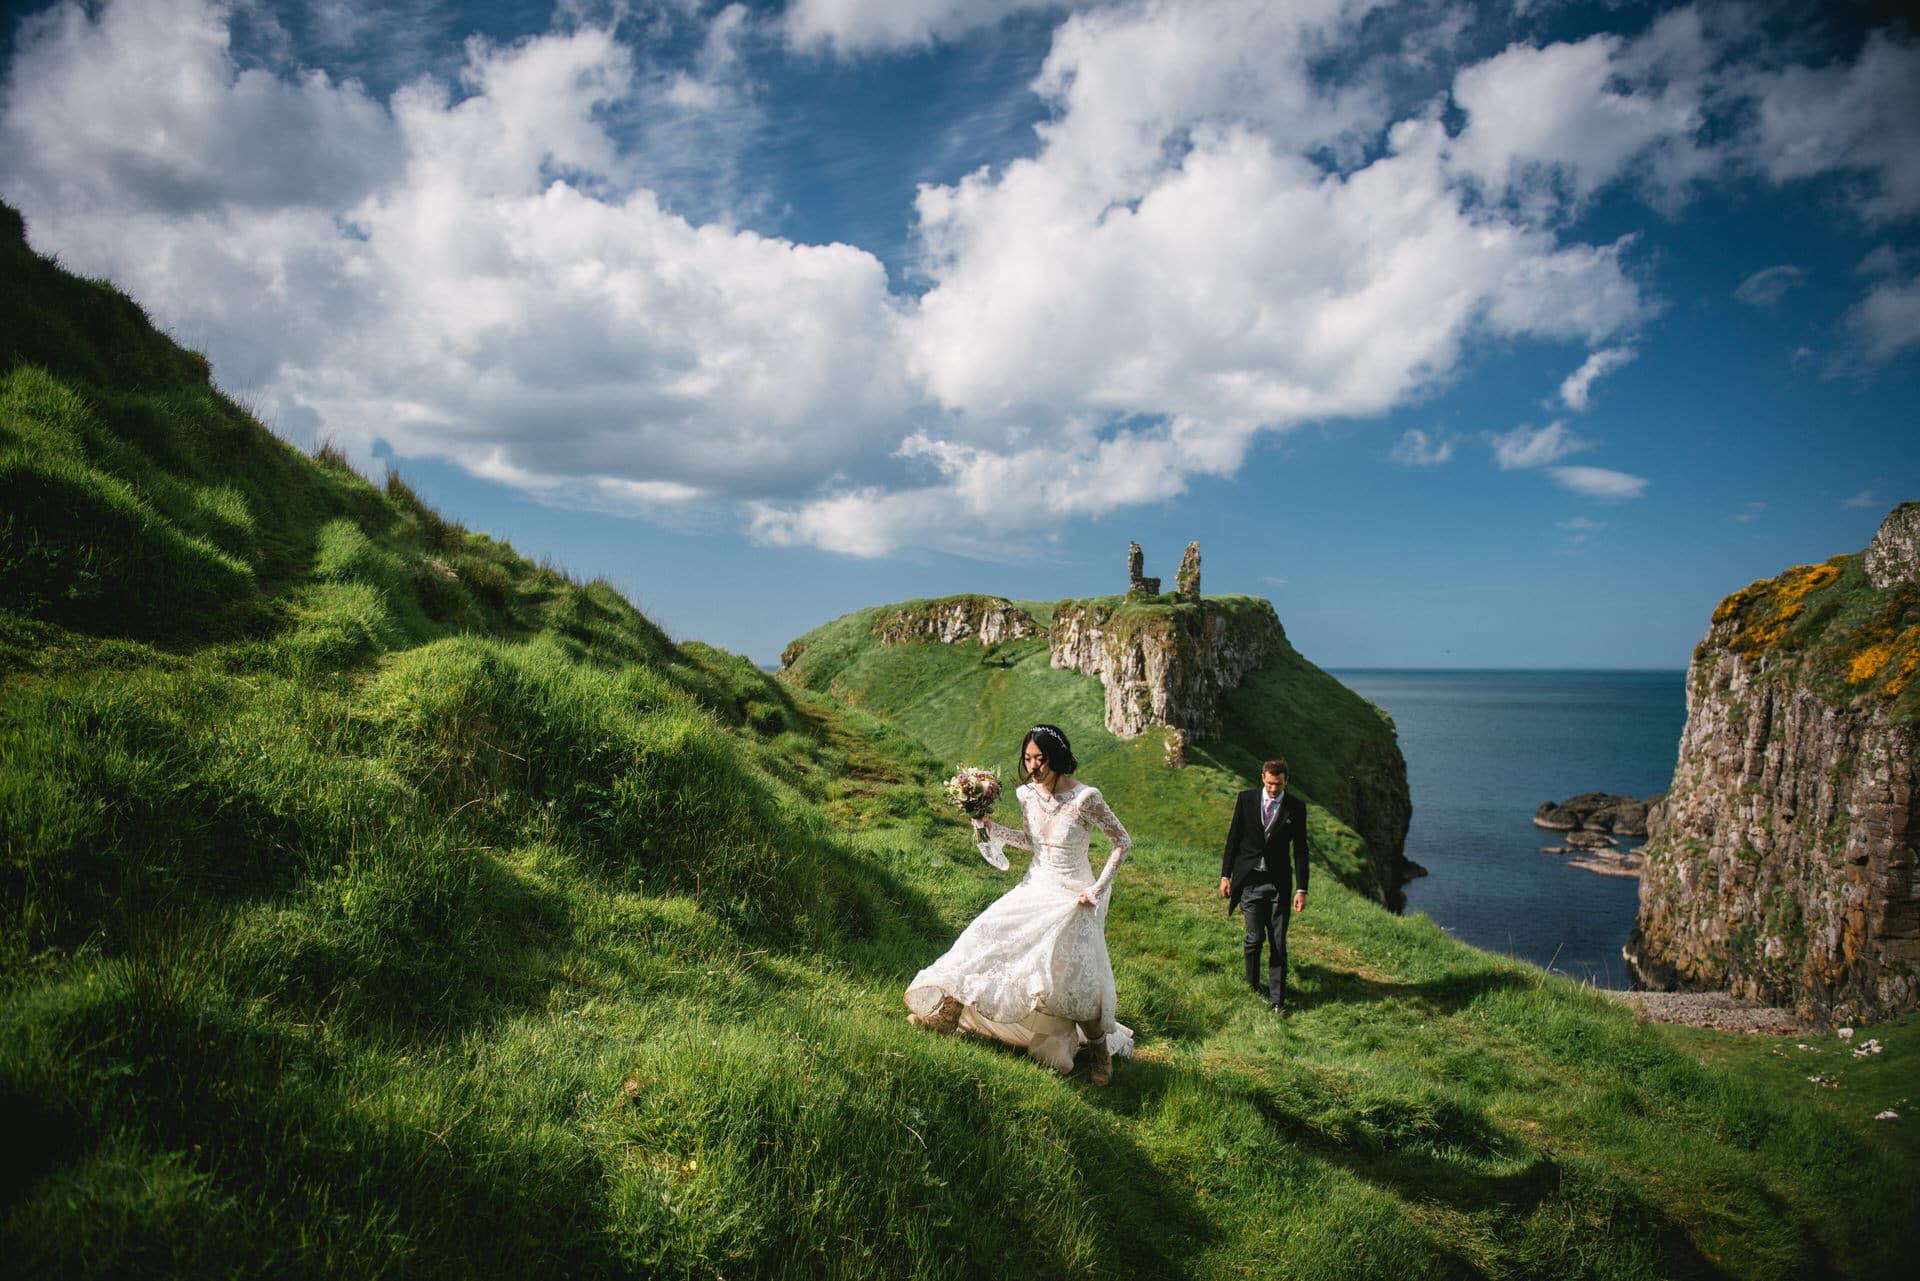 Candid shot of the couple sharing a private moment on a scenic hilltop during their Northern Ireland elopement.